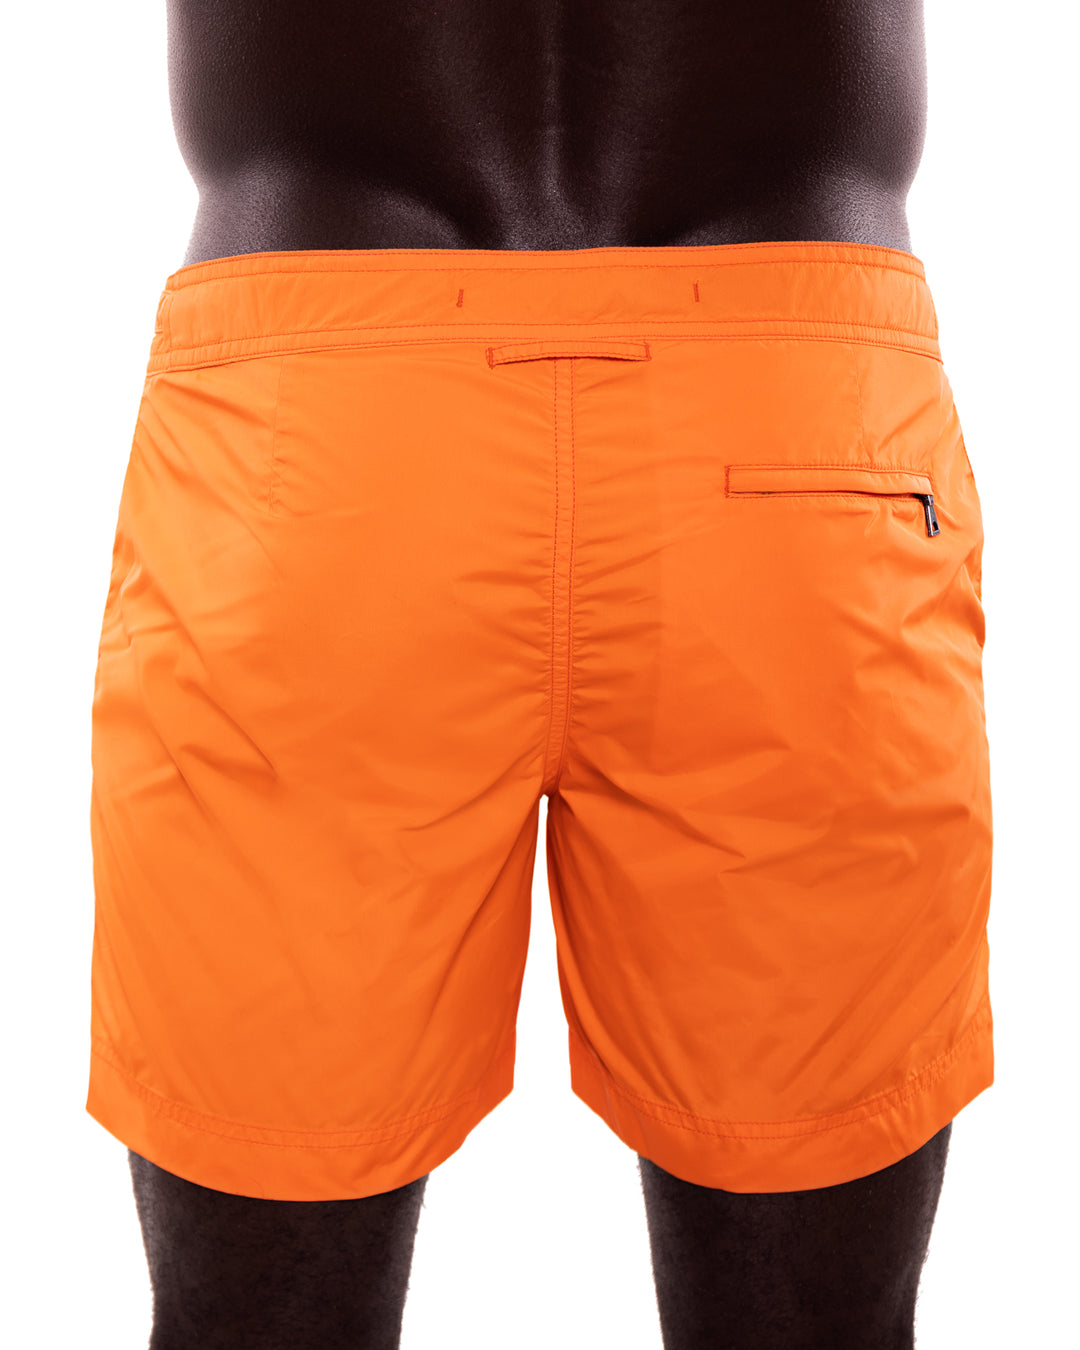 Sunrise
Cut in our signature Elvio silhouette, these hybrid swim shorts are made from quick drying breathable shell.




An elevated take on the classic swim shorts, they fswim shorts